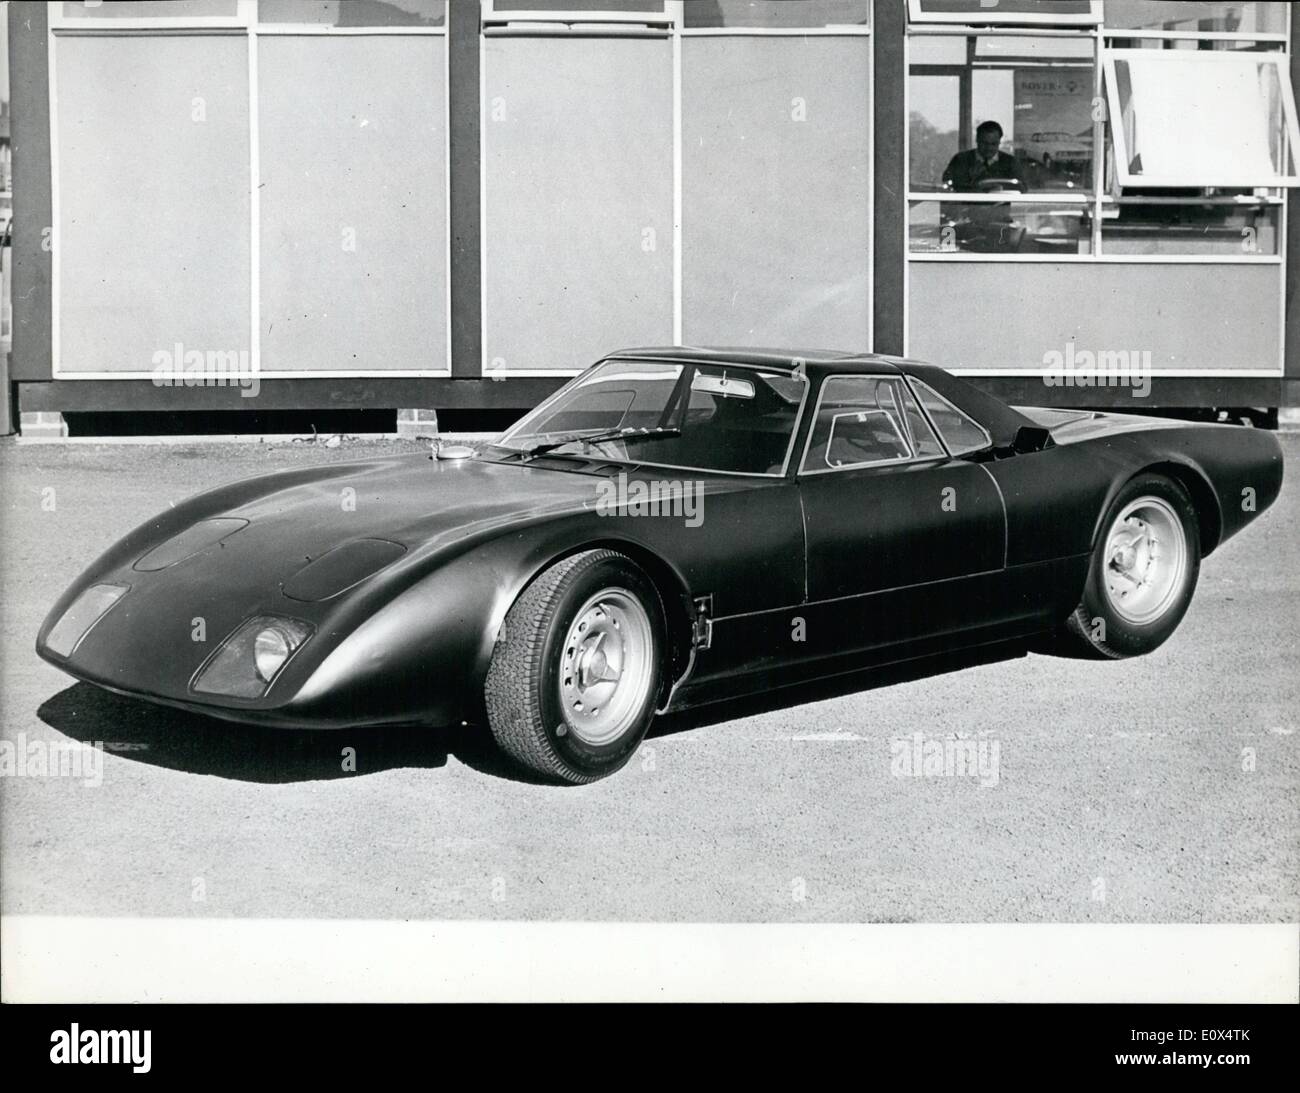 Apr. 04, 1965 - The New Rover Gas Turbine BR.R.M. - ''Whispering Ghost'' to take part in the Le Mans Race: For the first time the new Rover B.R.M. gas turbine engined sports car - will compare in the forthcoming 24 hour Le Mans race in June. It will compete on equal terms with the orthodox piston - engined cars in the 1600 c.c. or 2,00 c.c. class- yet to be decided. Stock Photo